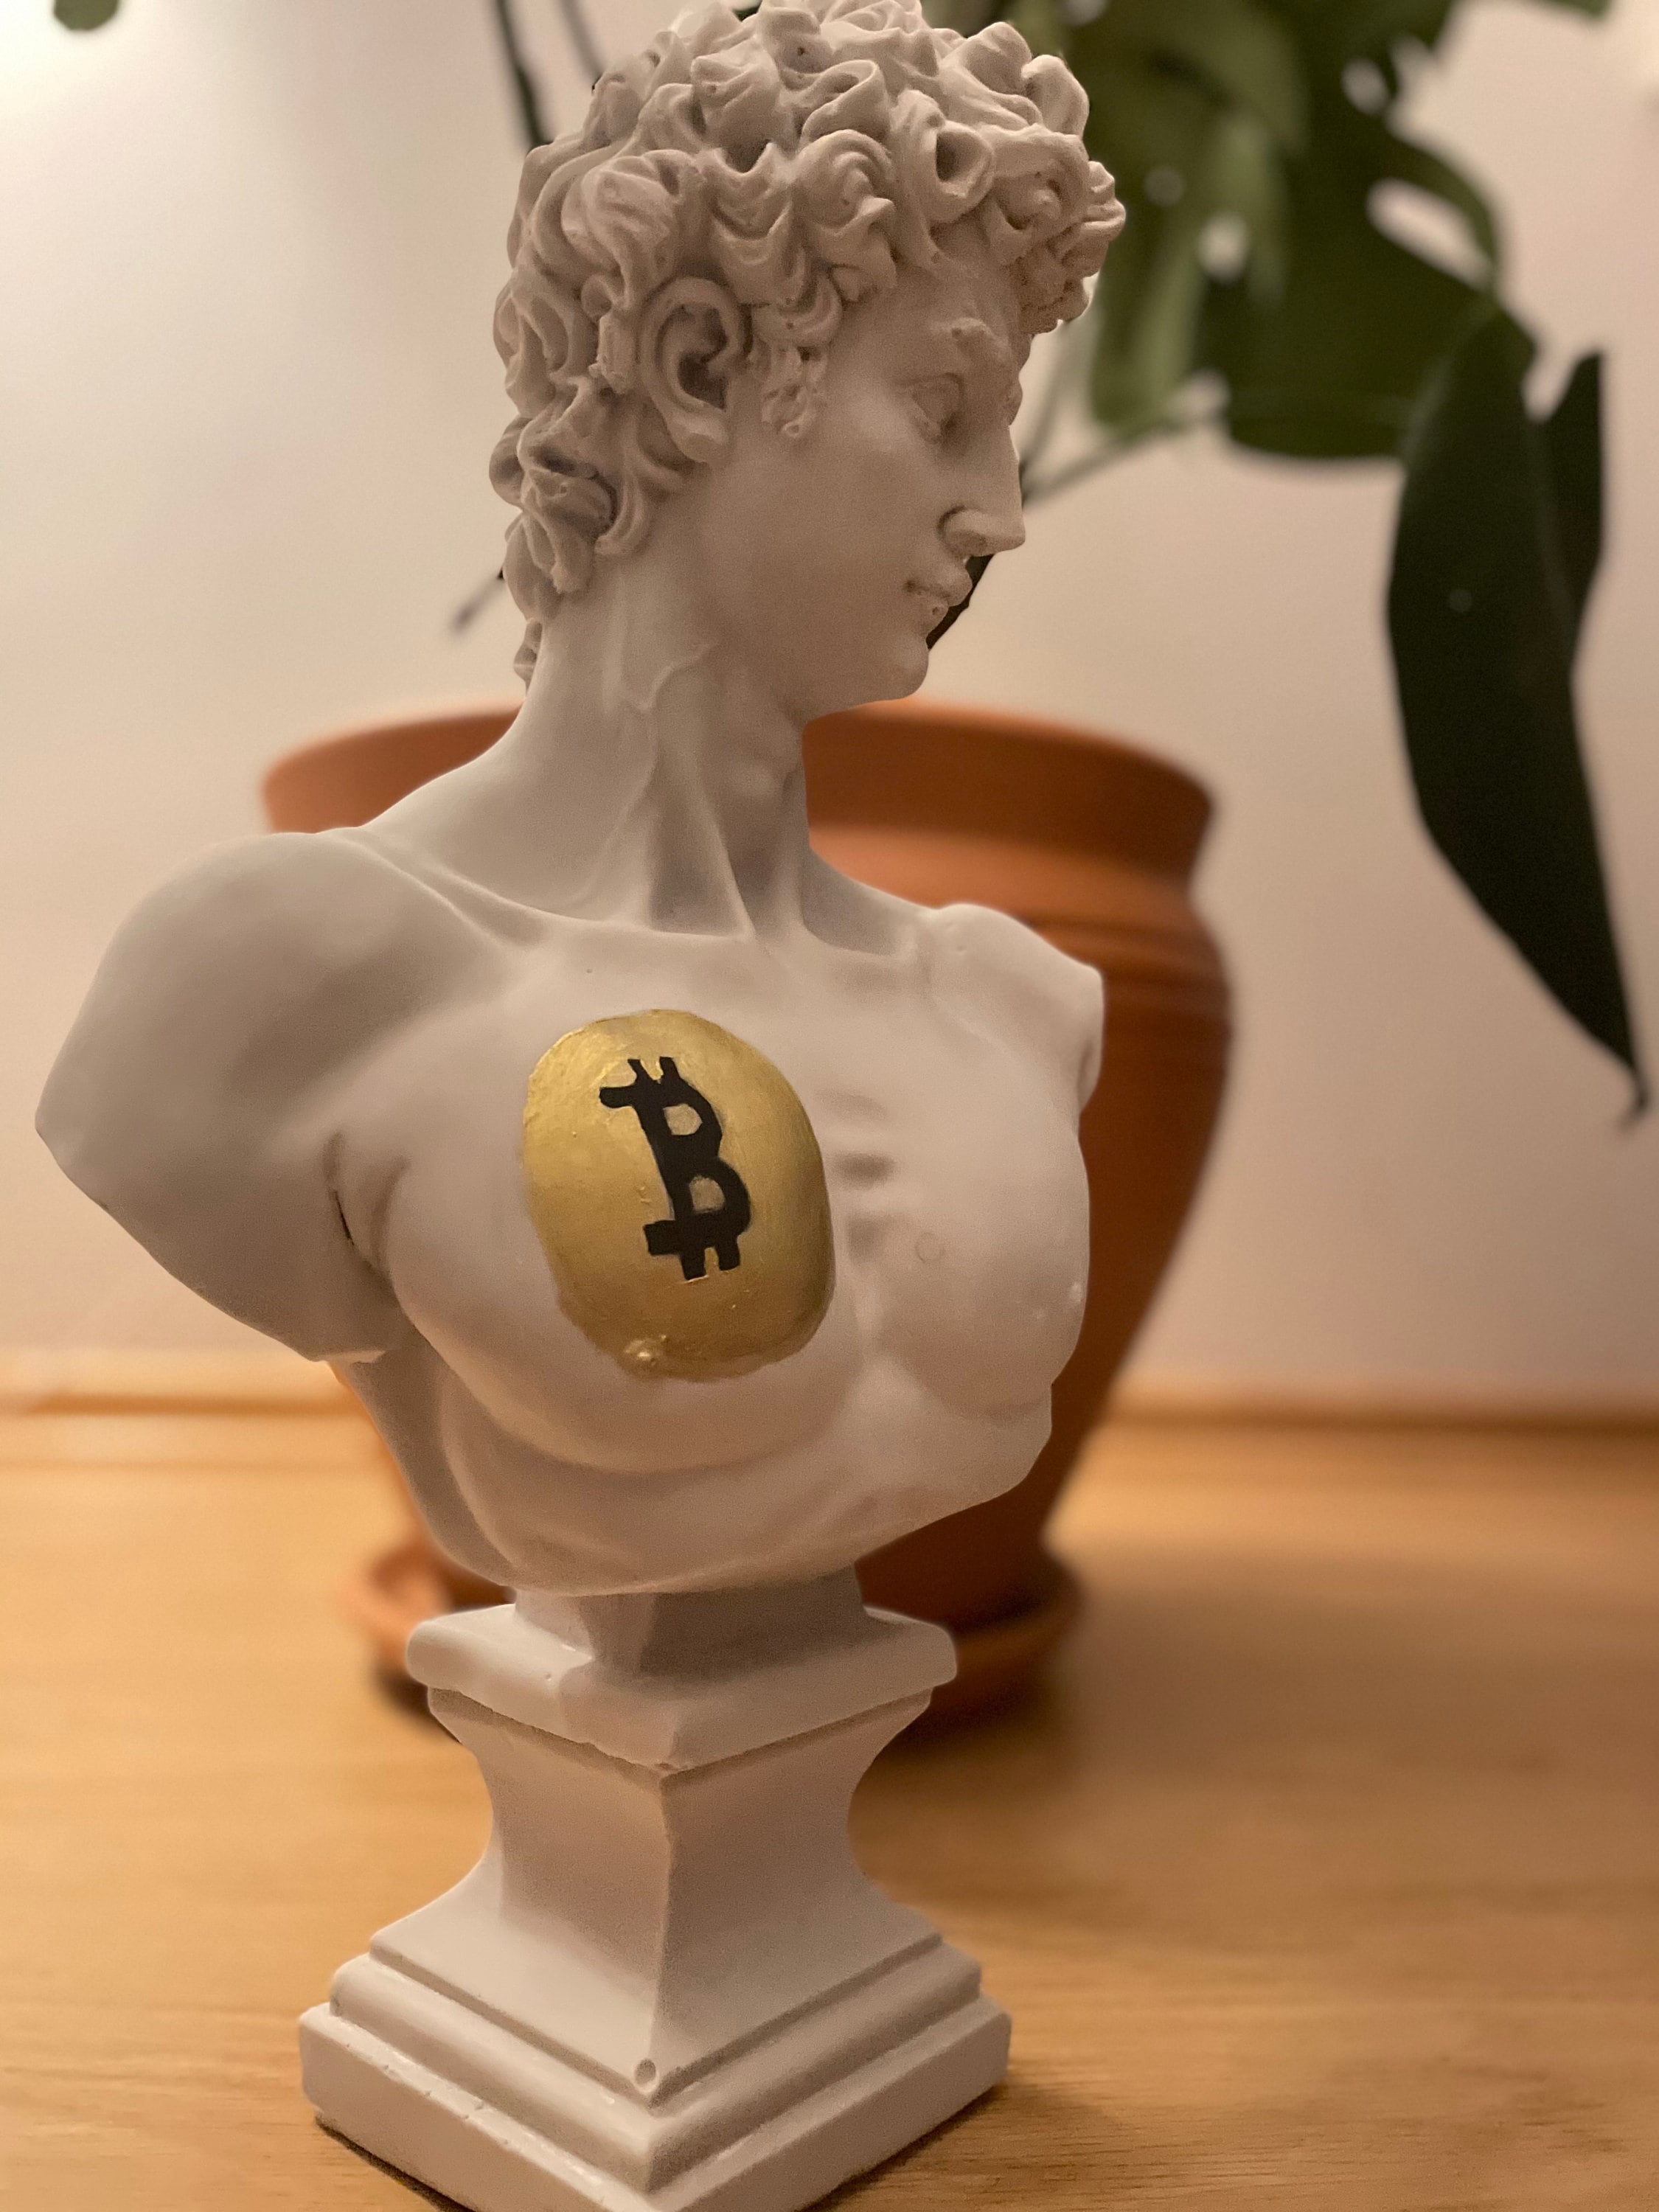 Timeless Opulence: Large David Coin Bust Sculpture in White and Gold